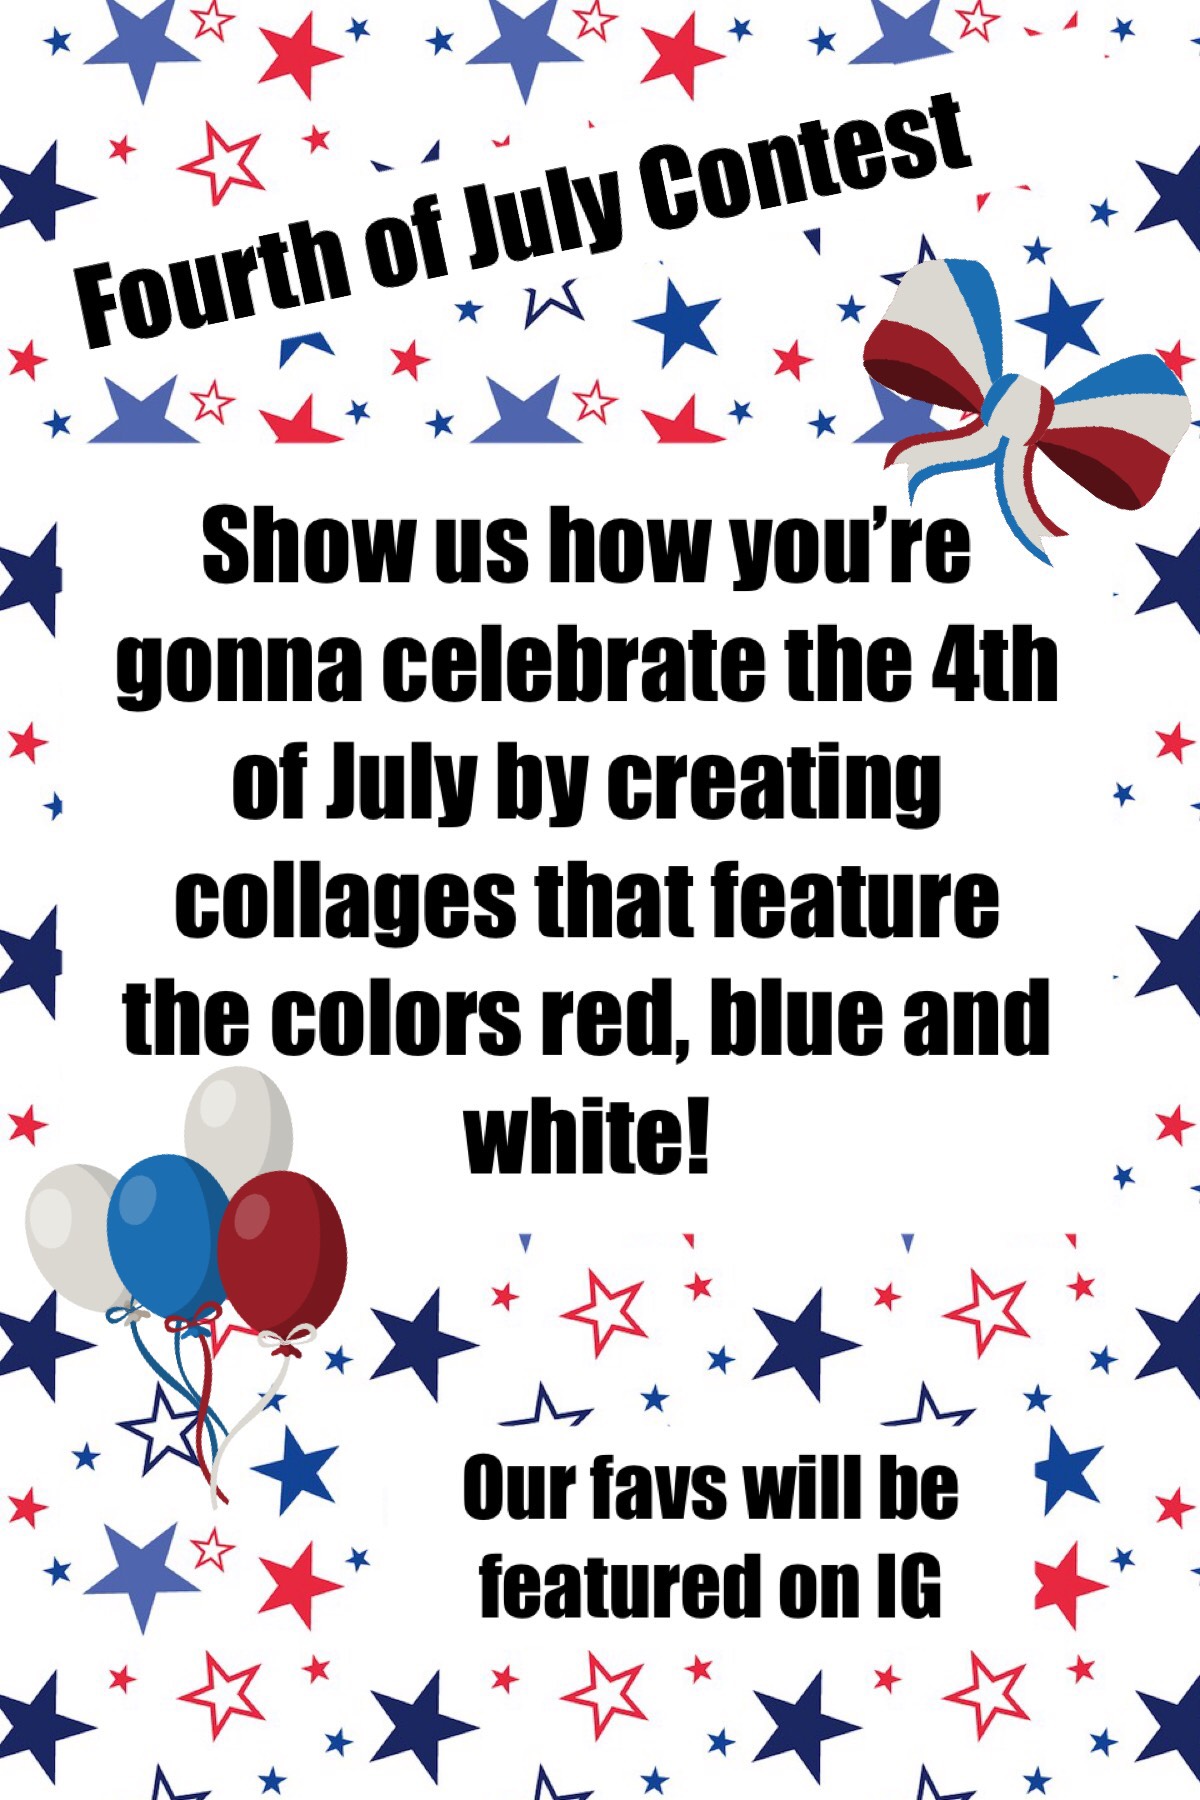 Fourth of July Contest is here! 